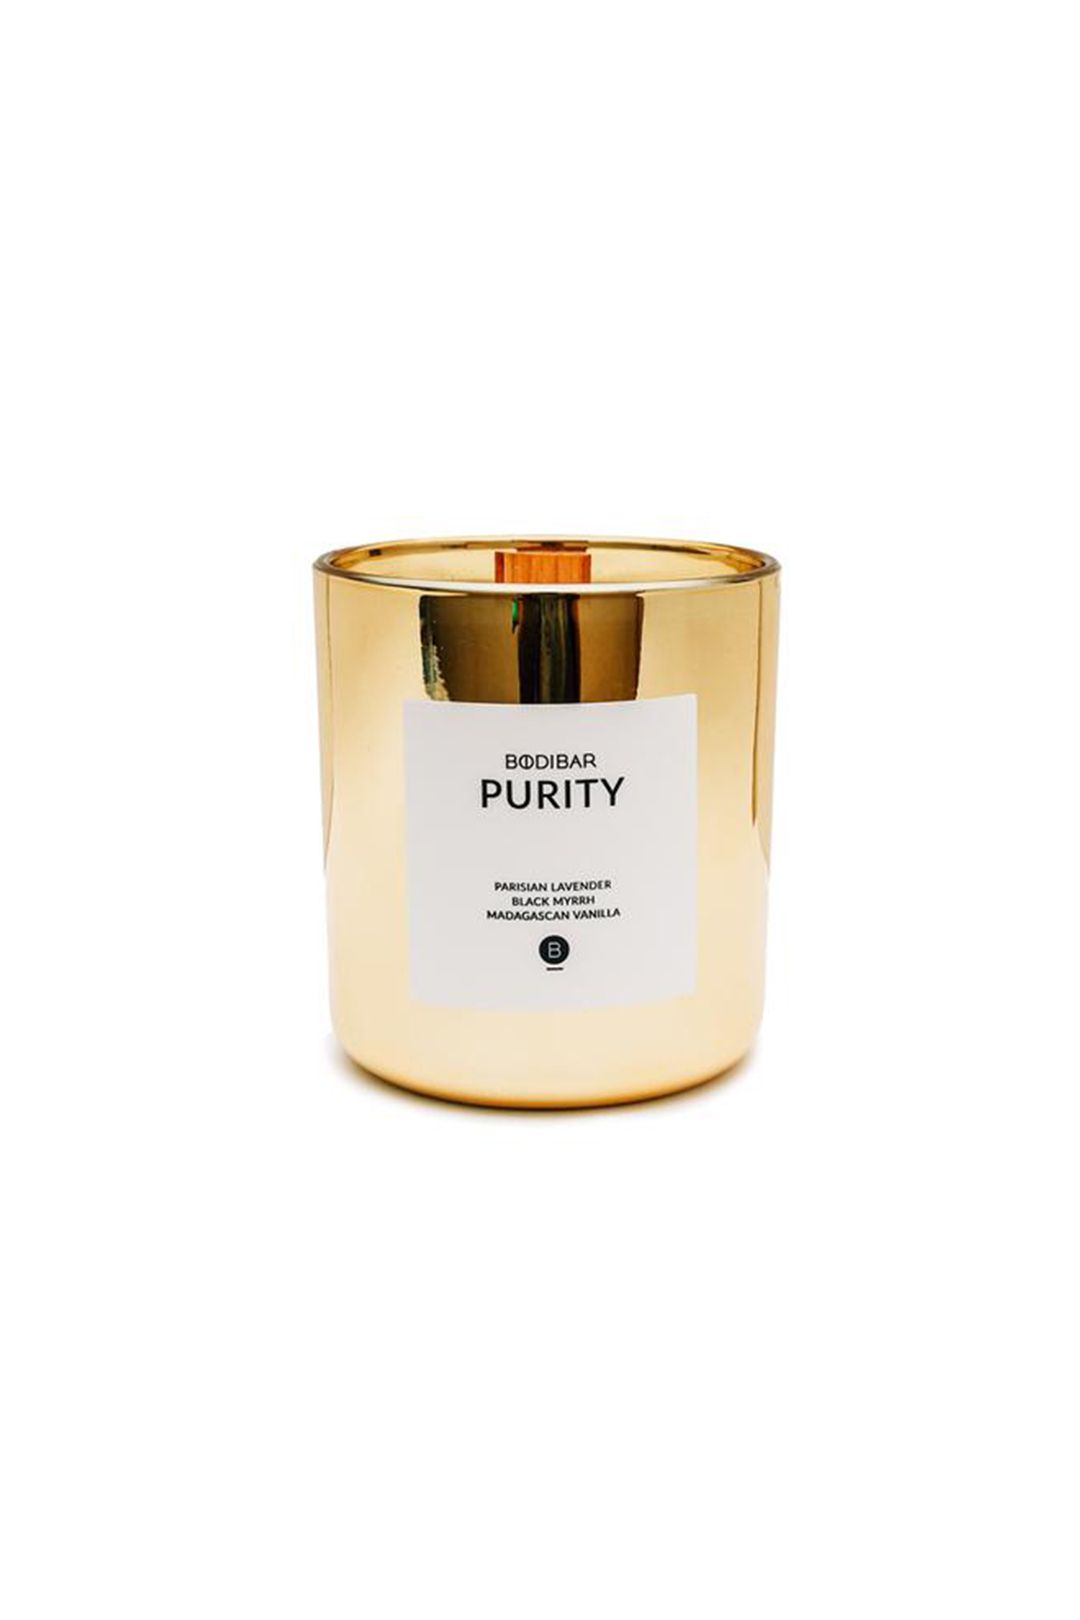 bodibar-signature-luxe-candles-purity-gold